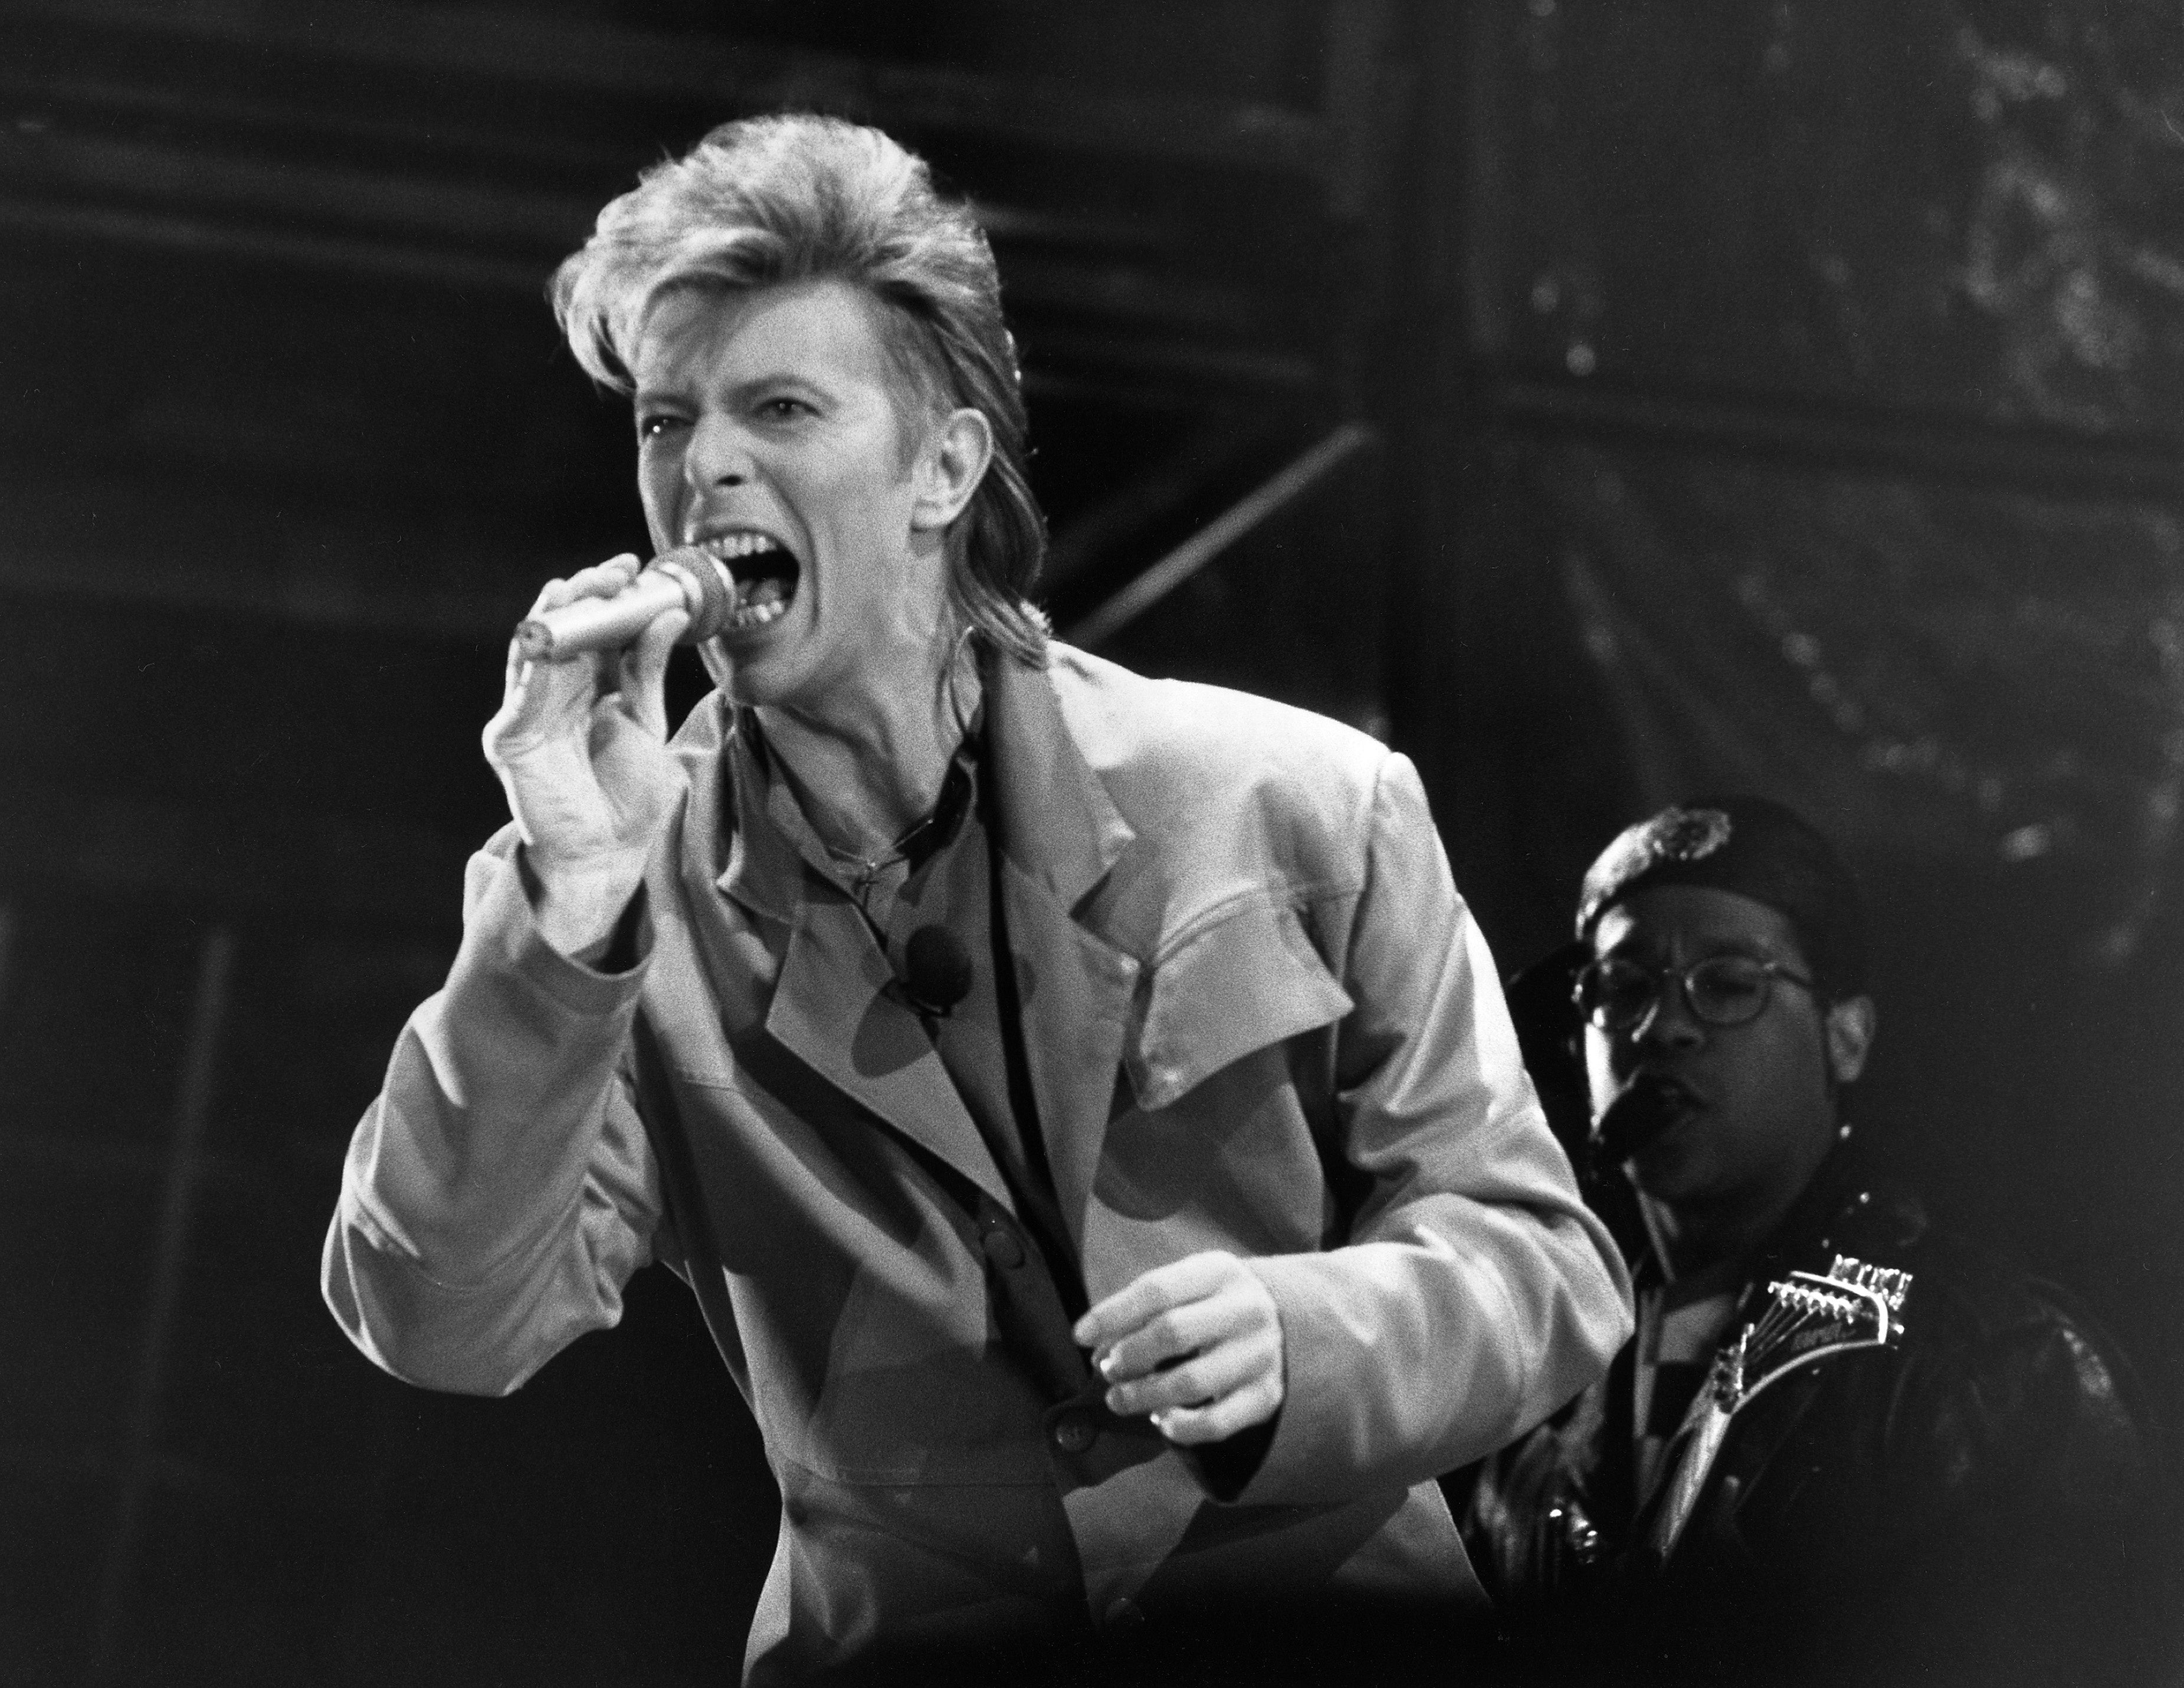 Bowie in concert in front of the Reichstag building in West Berlin in June 1987